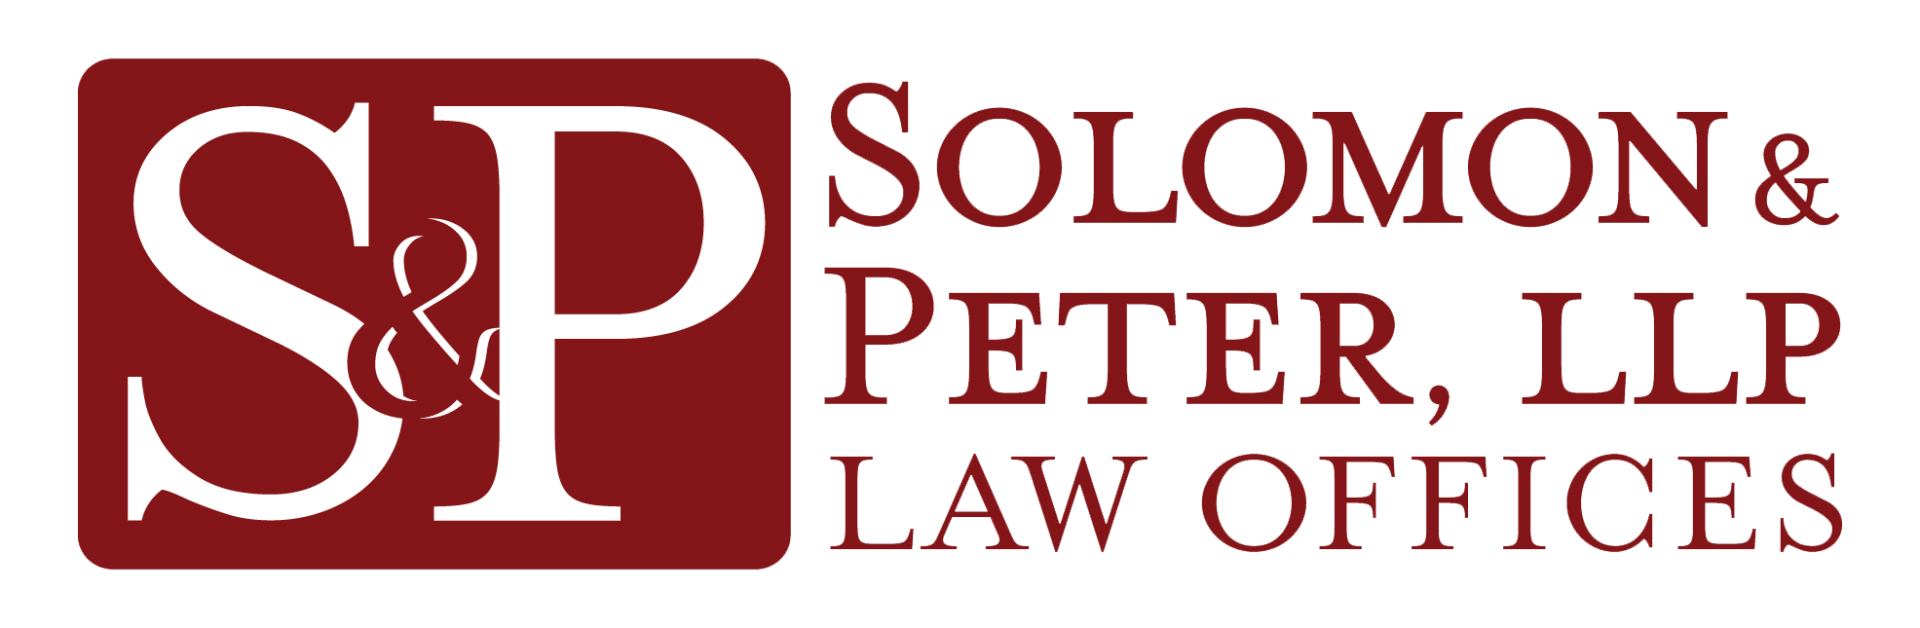 The logo for Solomon & Peter LLP Law Offices.